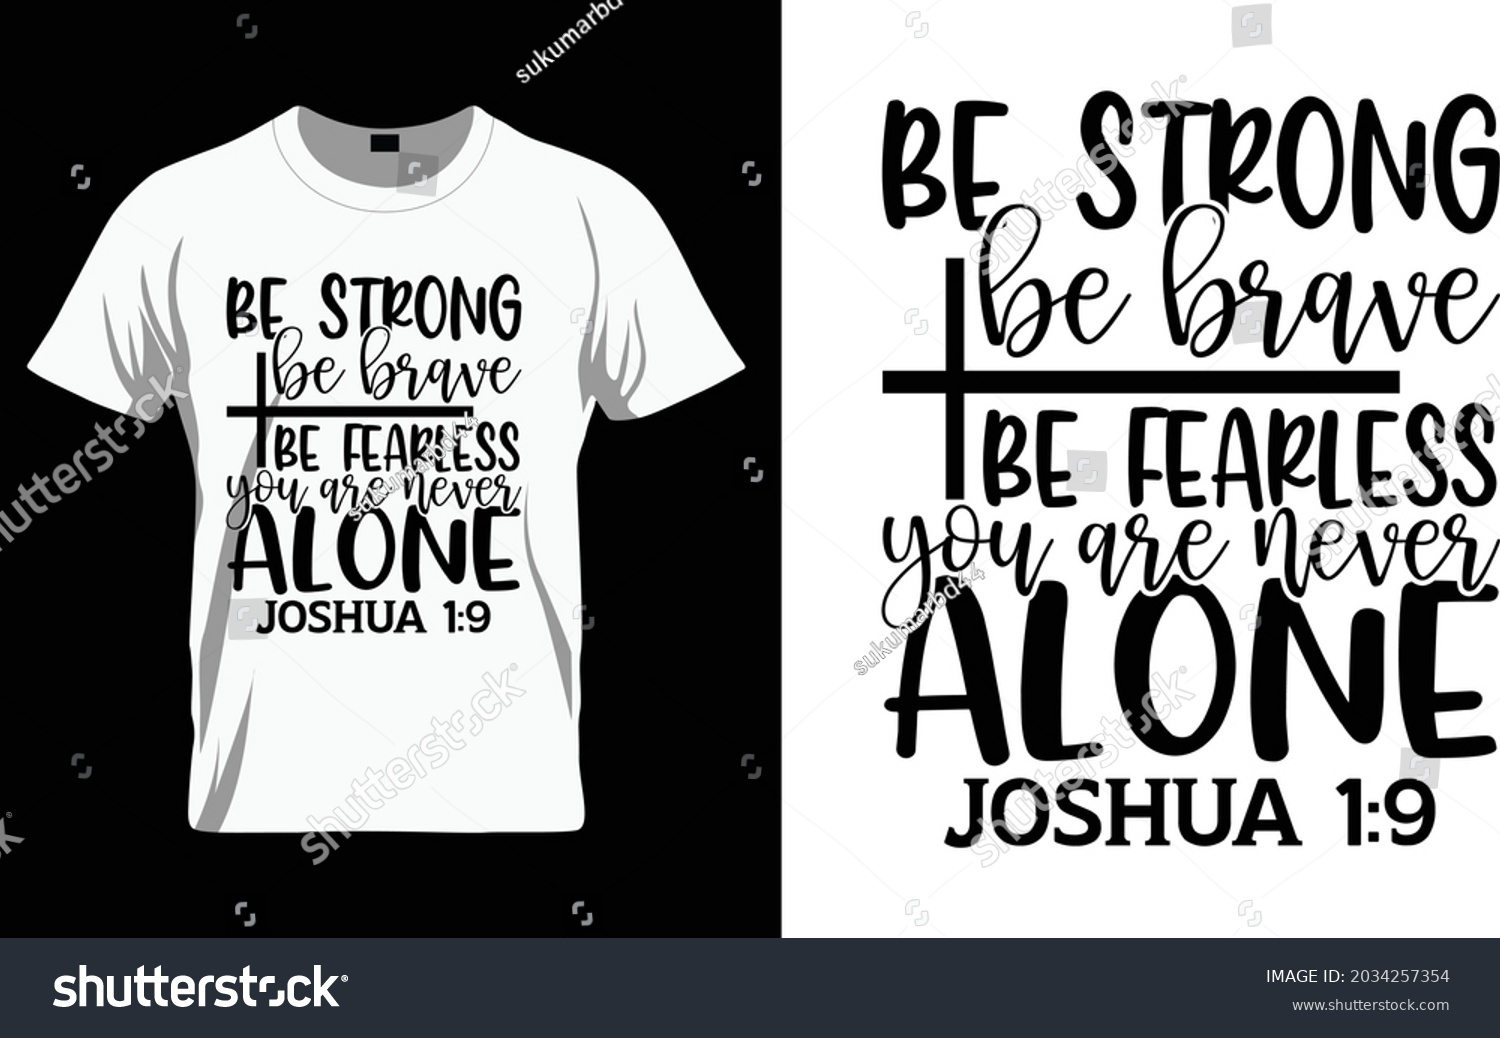 SVG of Be strong be brave be fearless you are never alone Joshua 1:9 - Bible Verse t shirts design, Hand drawn lettering phrase, Calligraphy t shirt design, Isolated on white background, svg Files for Cuttin svg